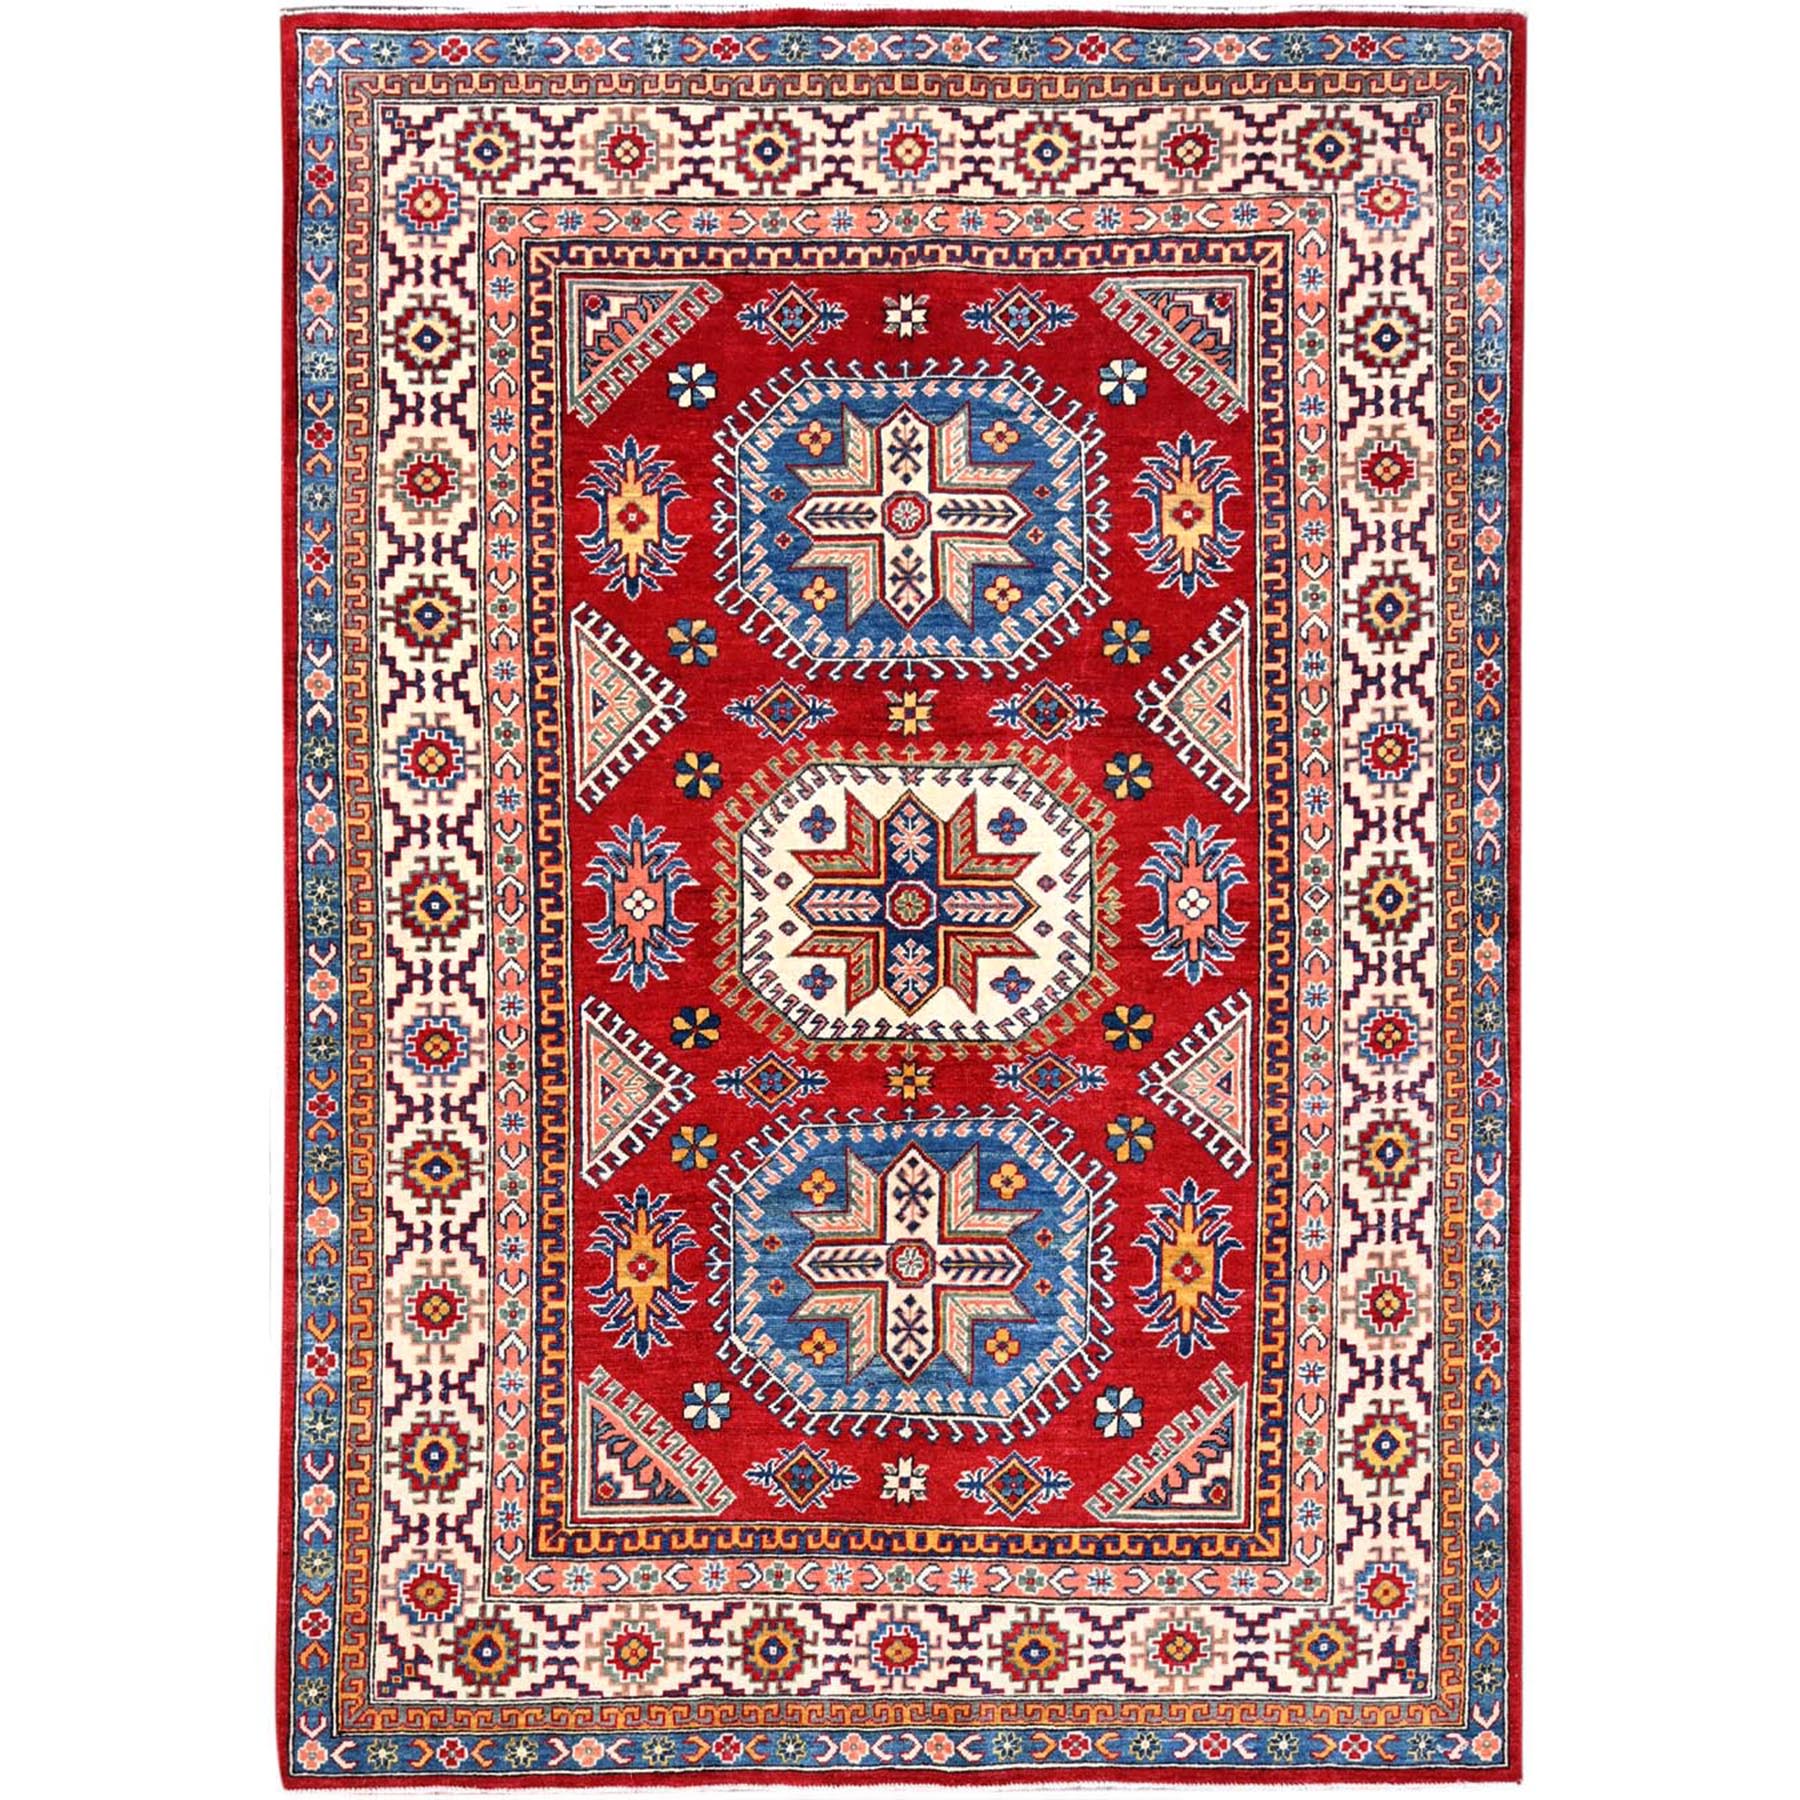  Wool Hand-Knotted Area Rug 5'11